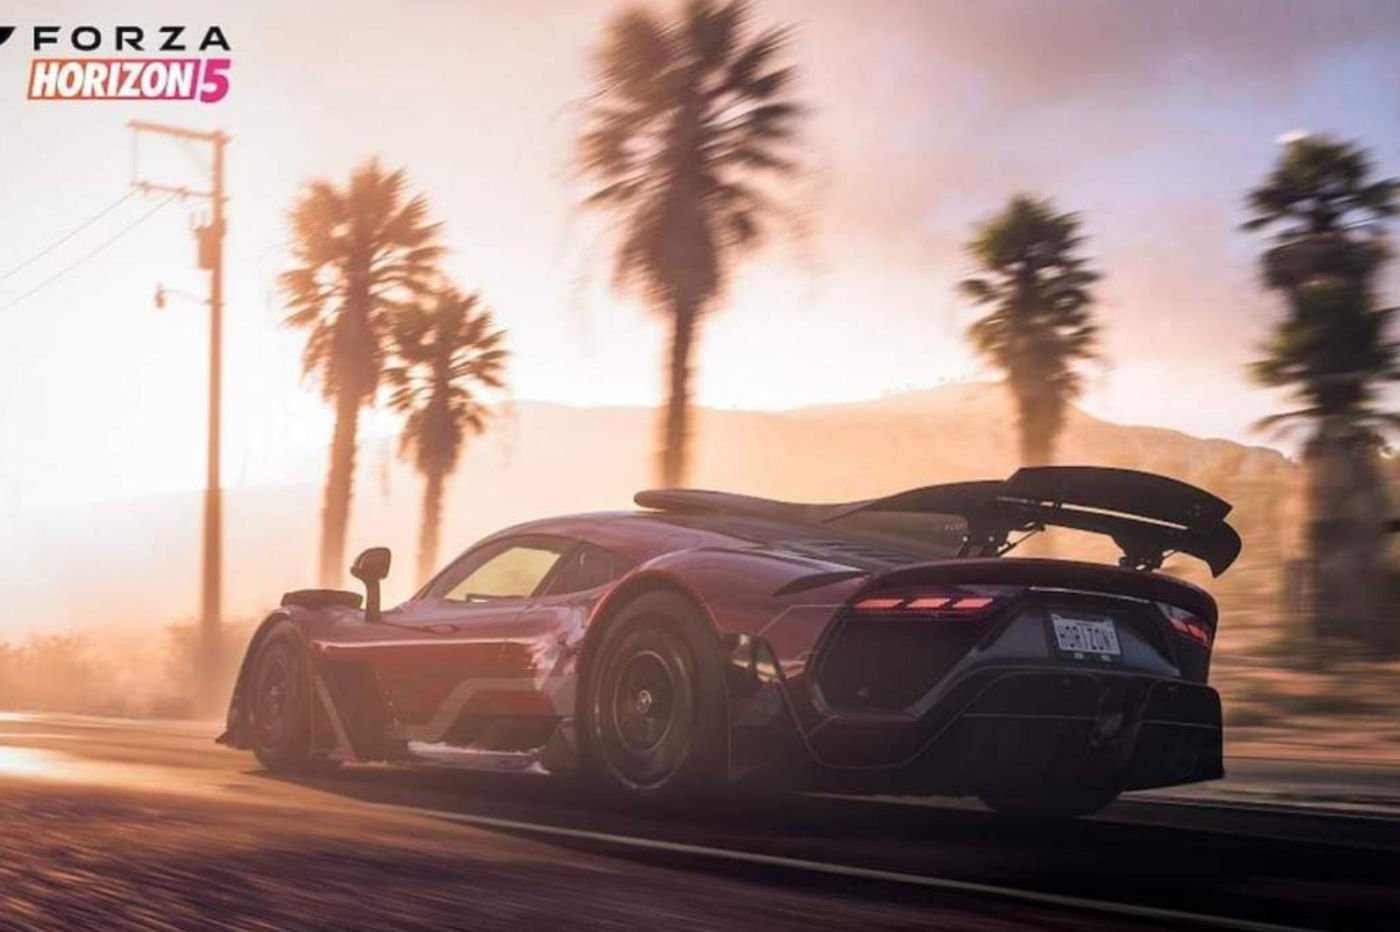 Microsoft unveils specifications for Forza Horizon 5 thumbnail